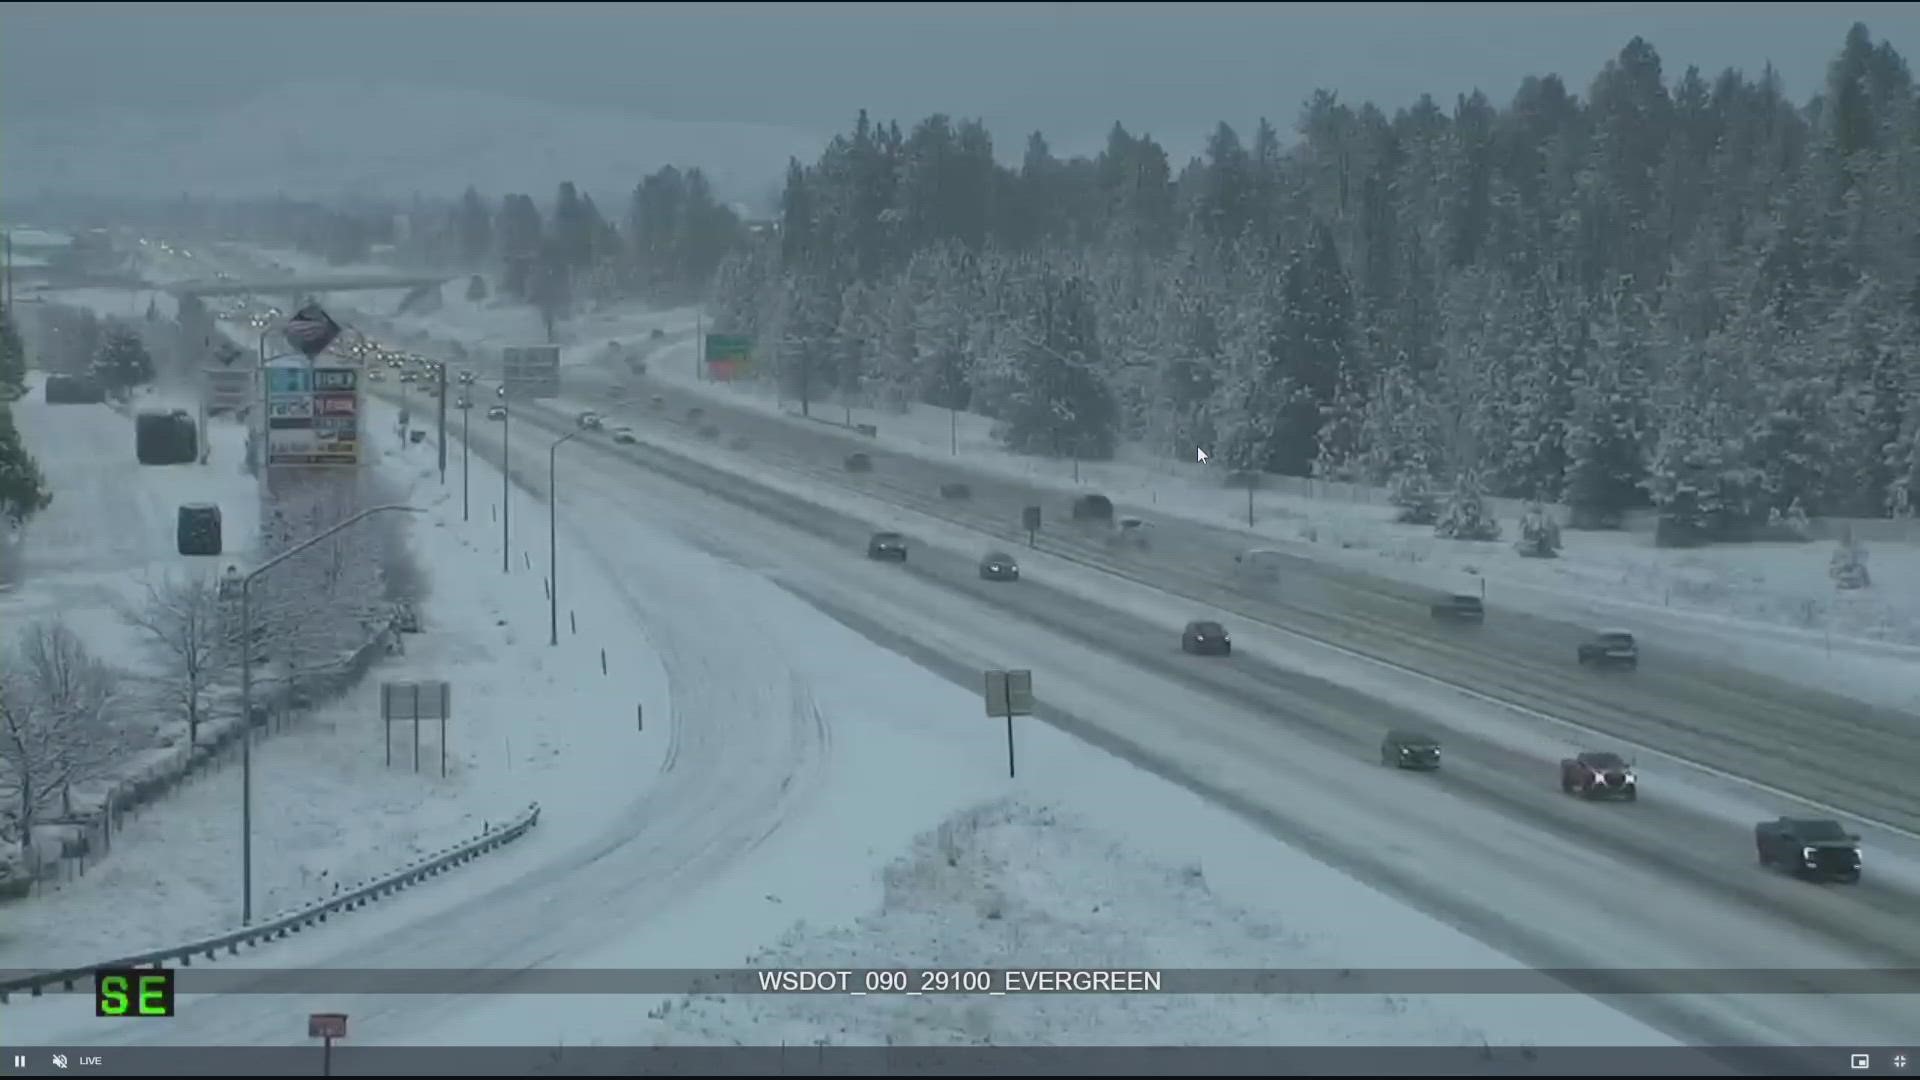 WSDOT gives update on snow, eastern Washington road conditions